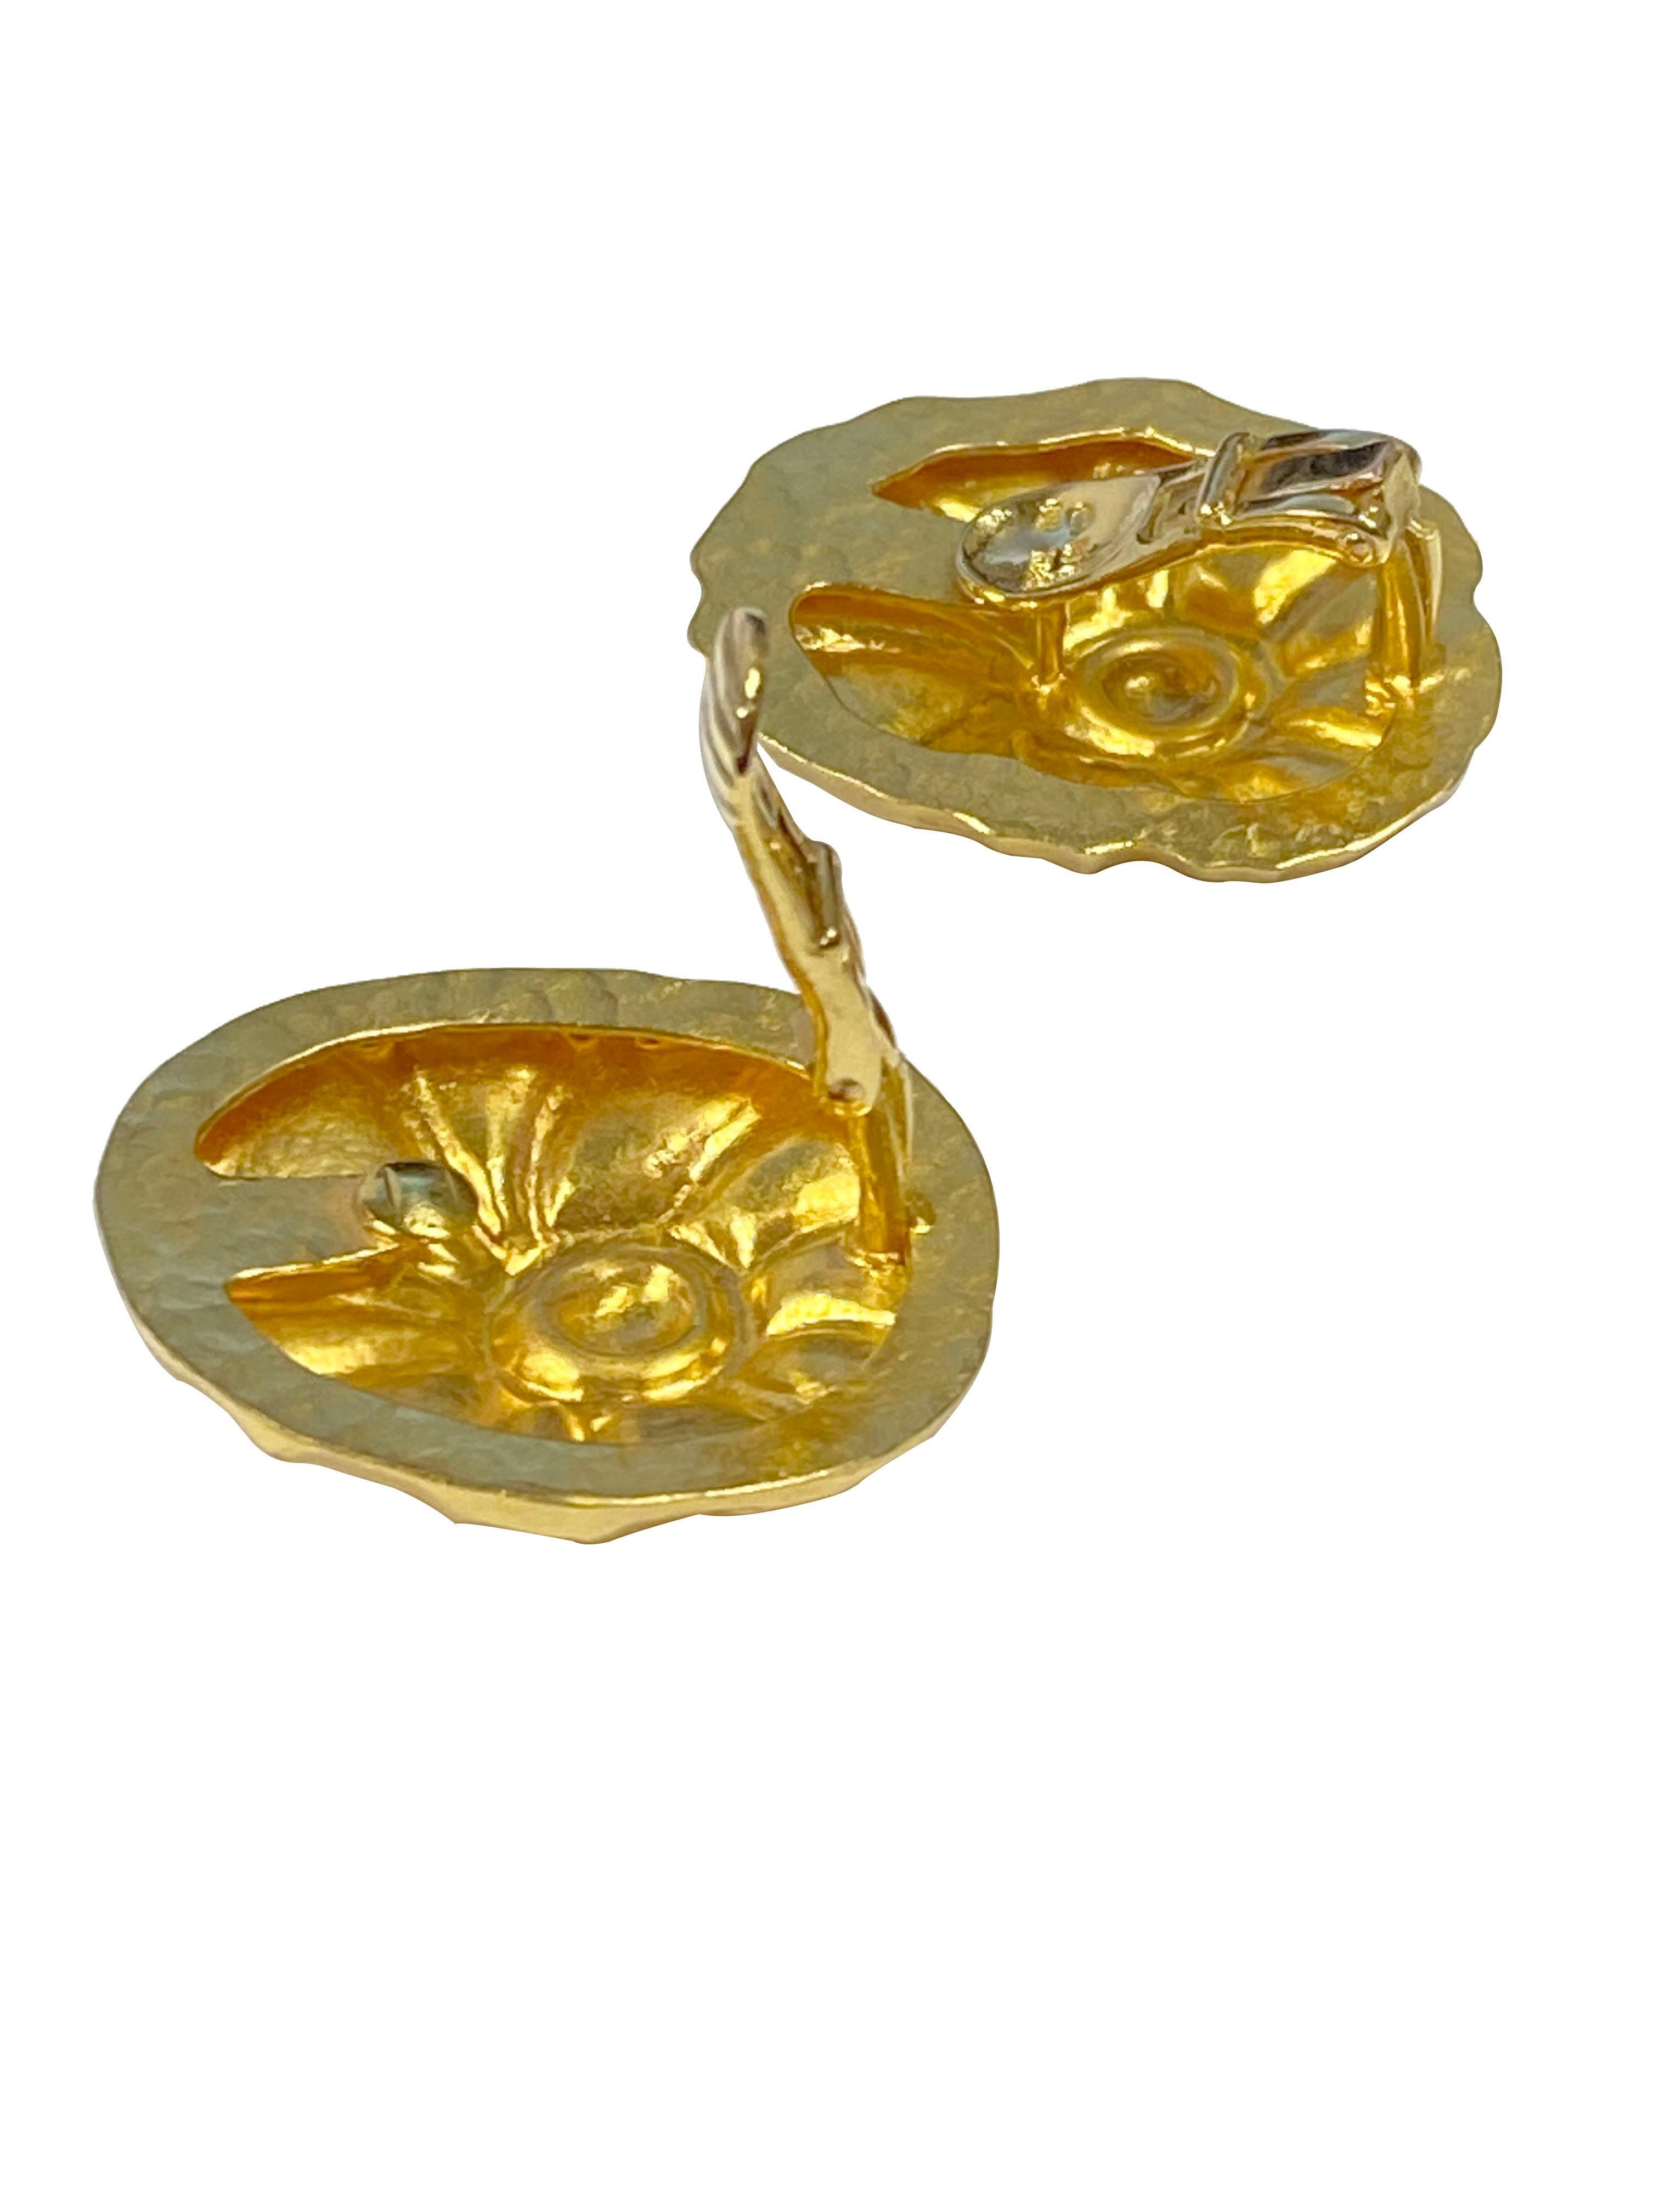 Circa 1990 Ilias Lalaounis 18k Yellow Gold Earrings, measuring 1 1/8 X 1 inch and weighing 16.7 Grams, having a hand hammered finish with a Nautical Ocean design. Having clip backs to which a post can be easily added if desired. 